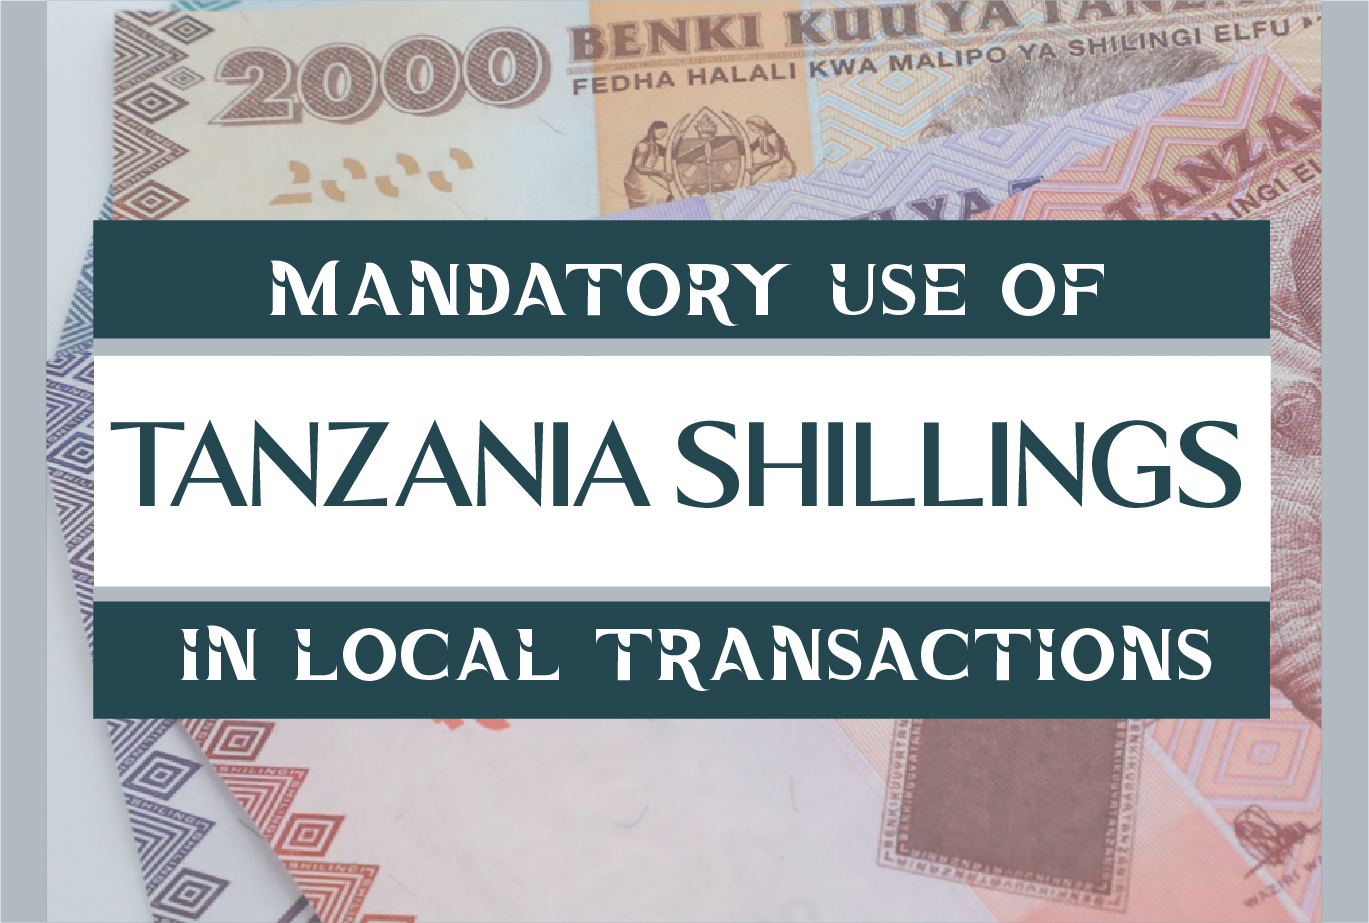 Mandatory Use of Tanzania Shillings in Local Transactions